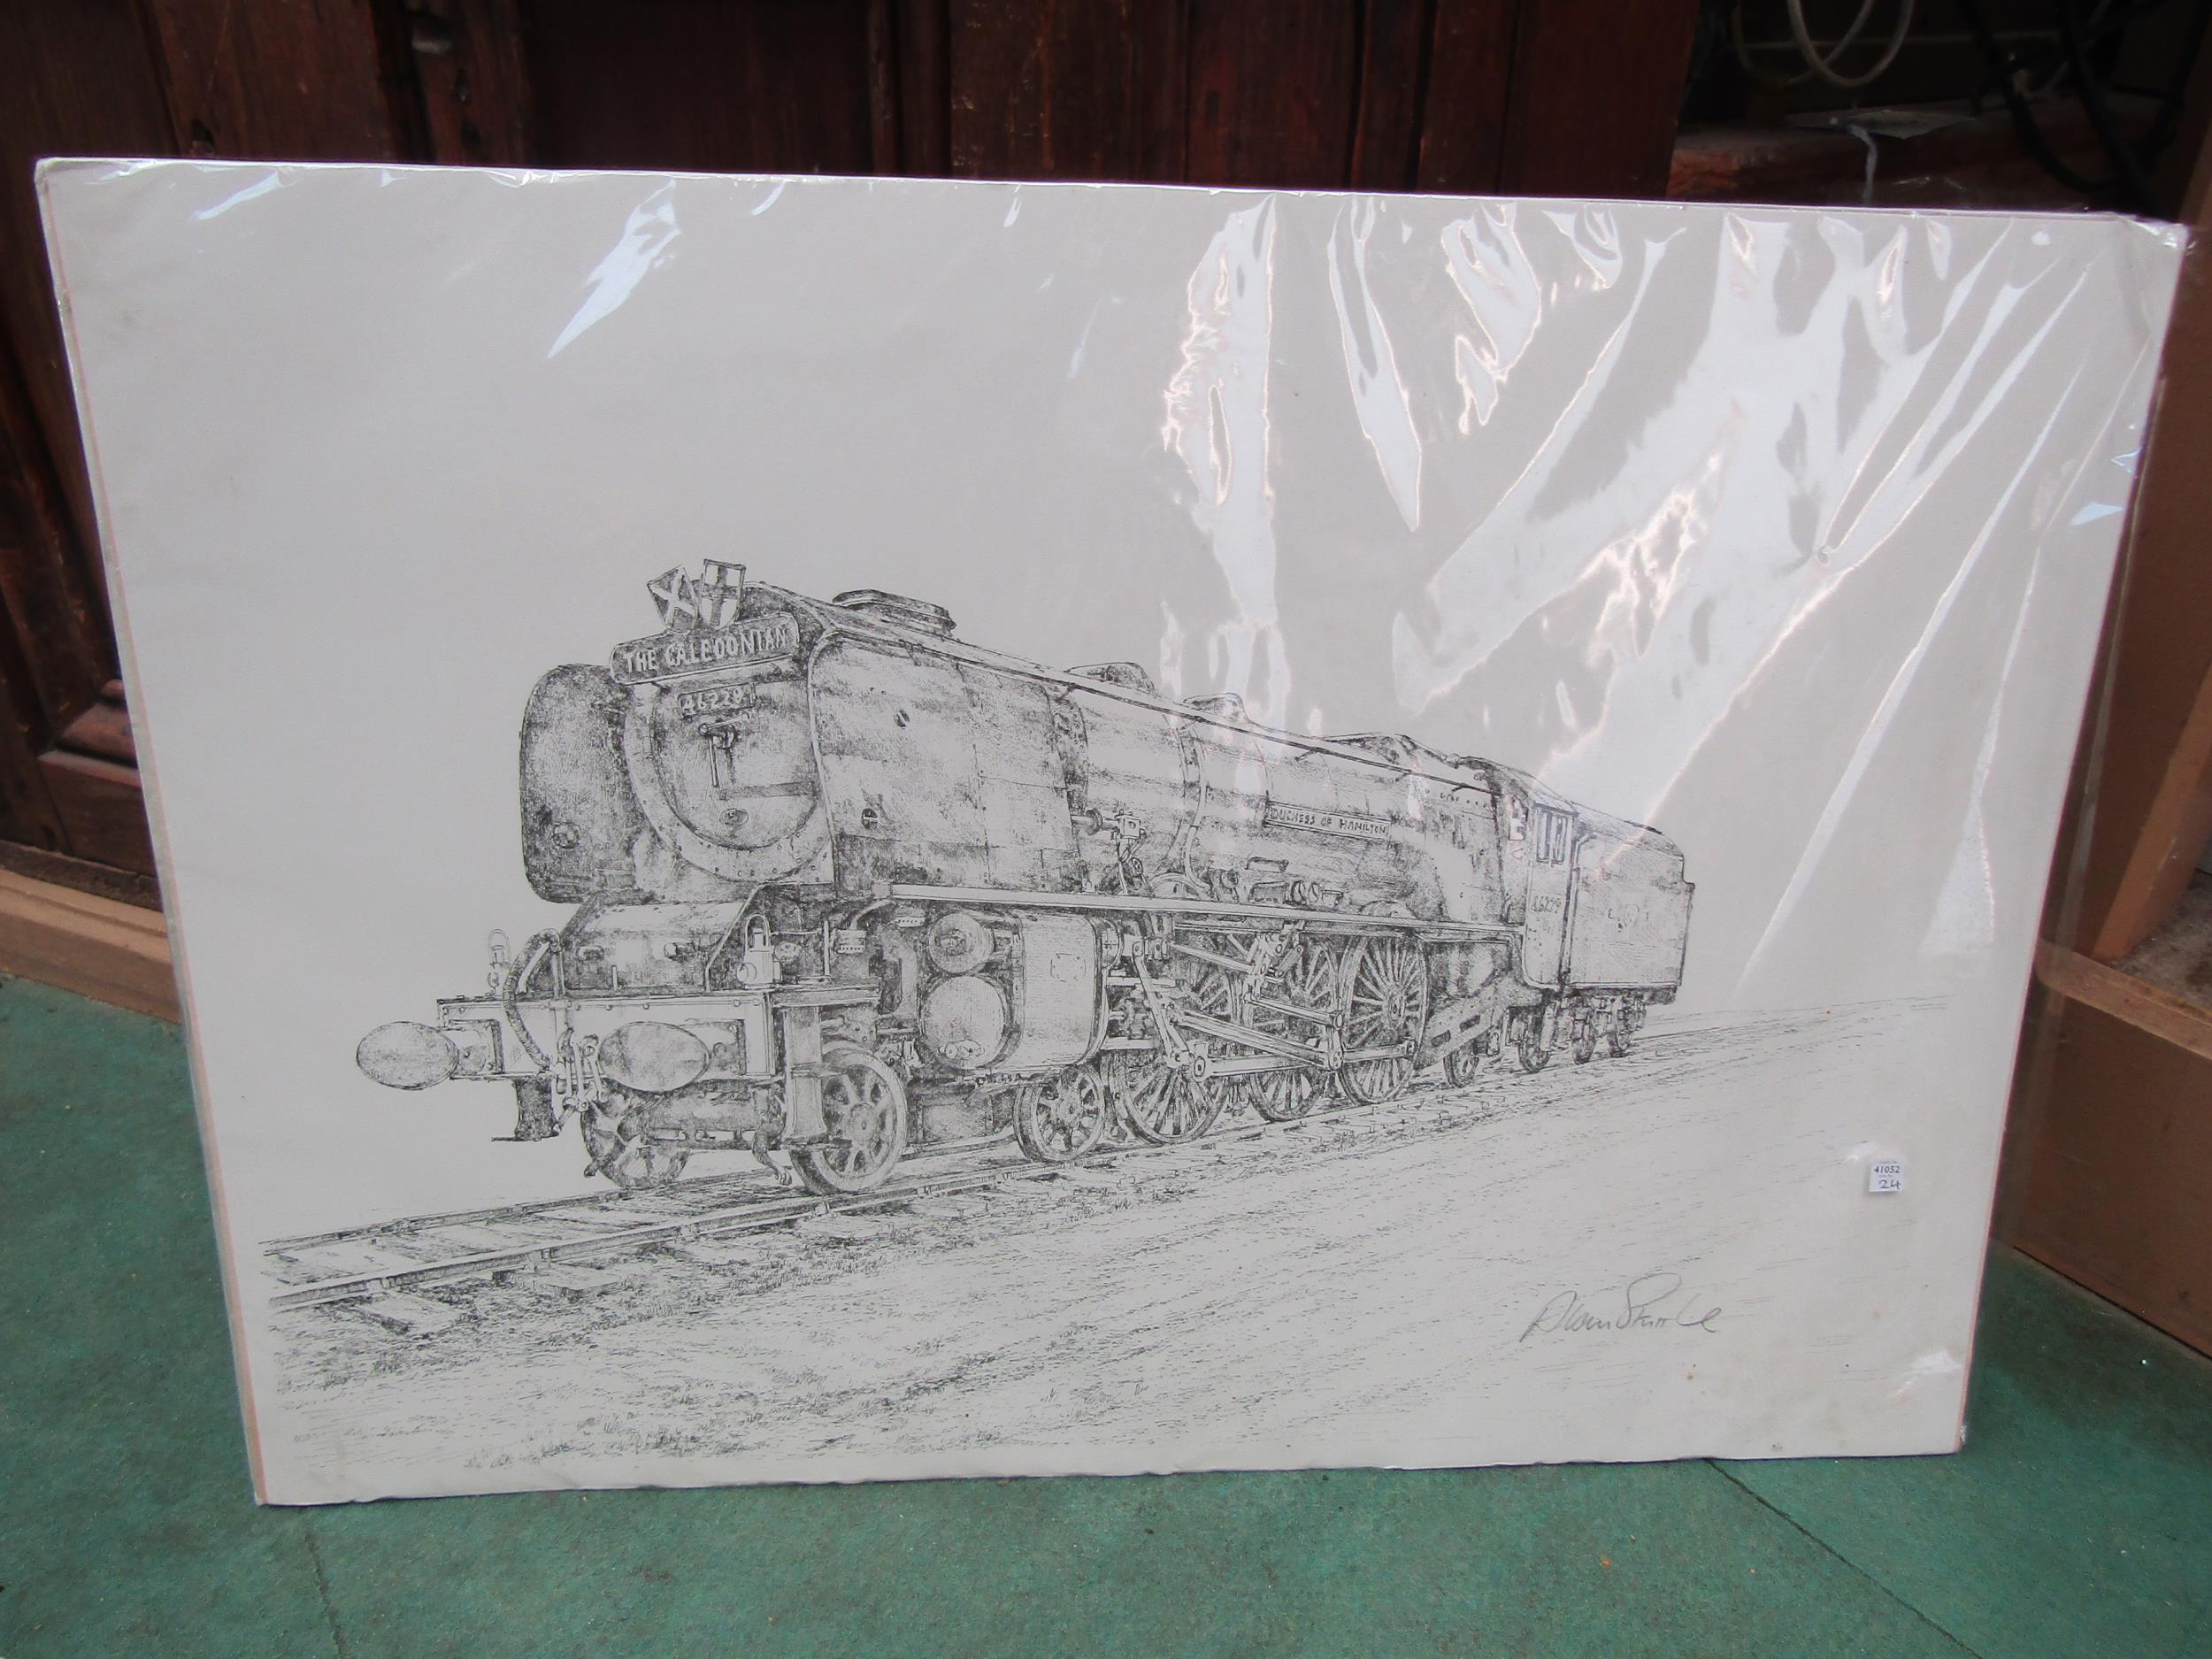 A pen & ink drawing of locomotive 46229, "Duchess of Hamilton", signed bottom right.